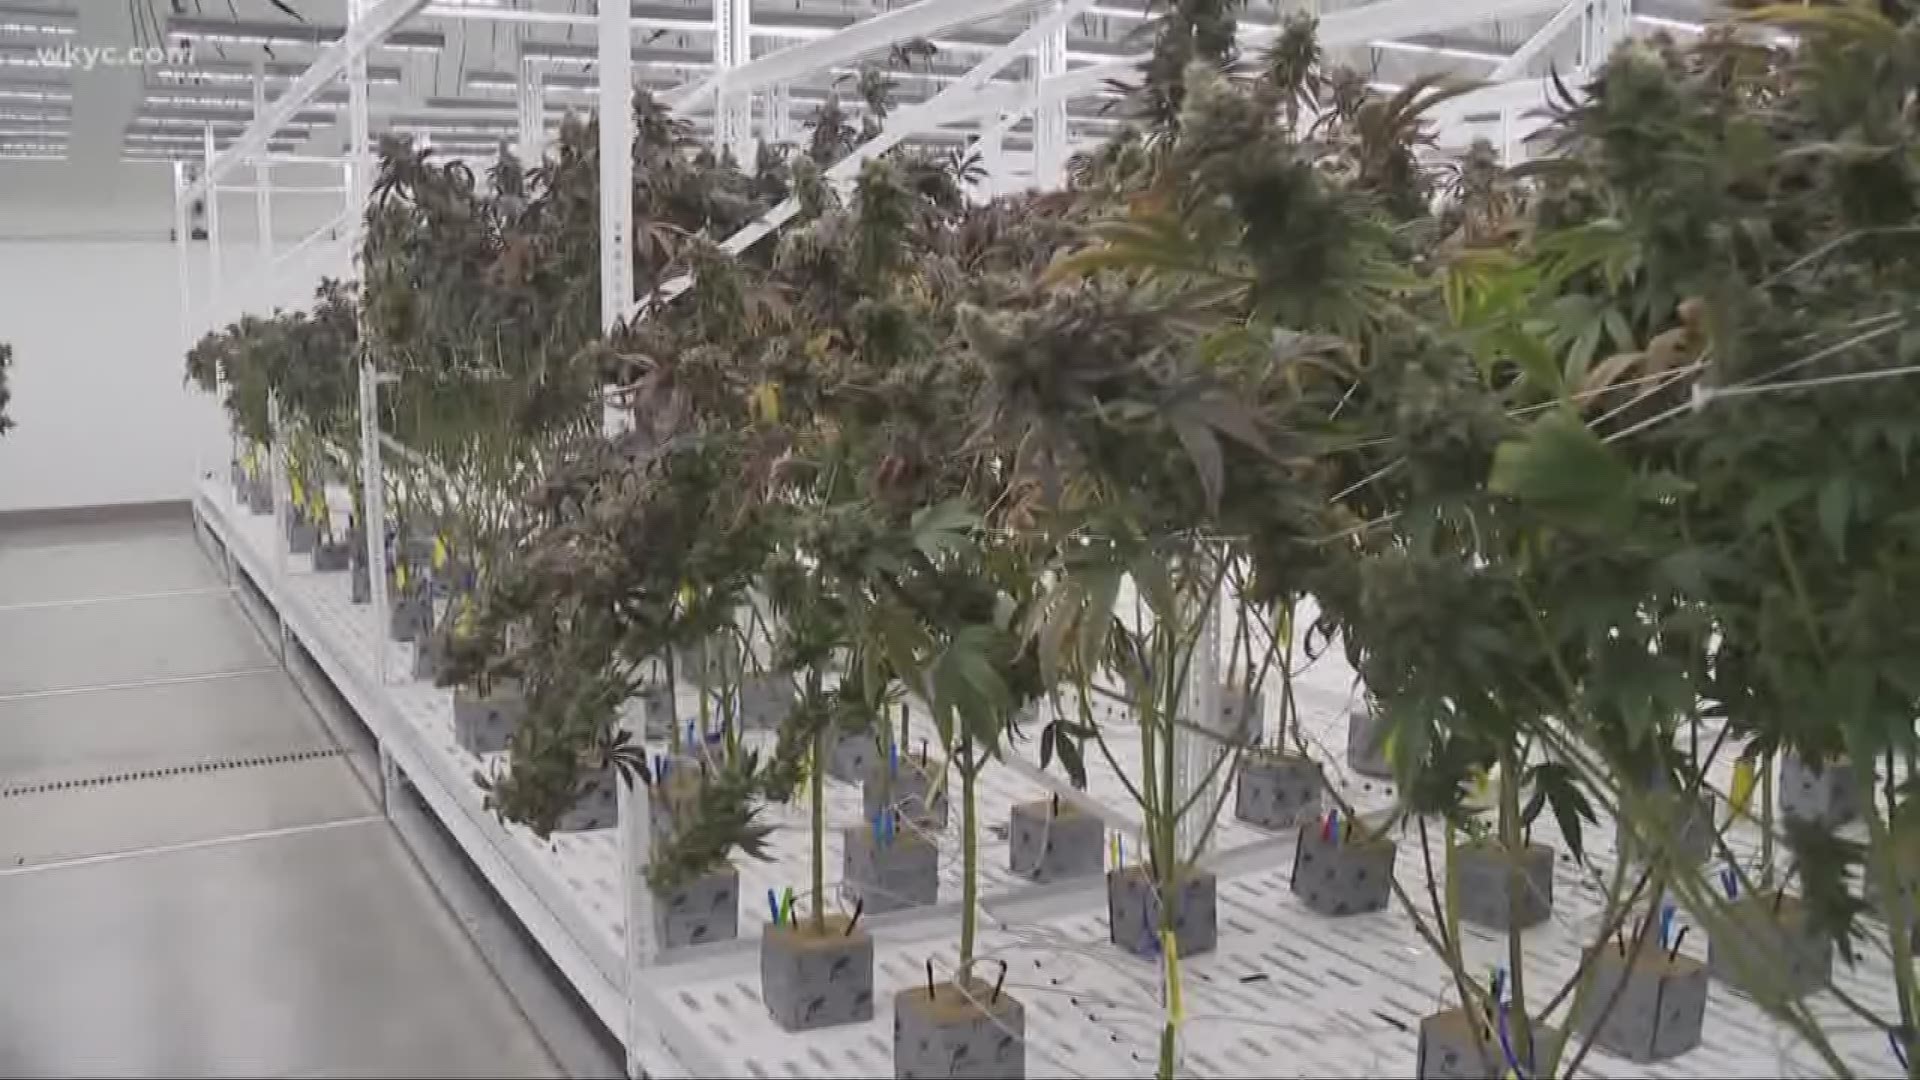 Buckeye Relief in Eastlake has begun the first level 1 harvest of cannabis in the state of Ohio